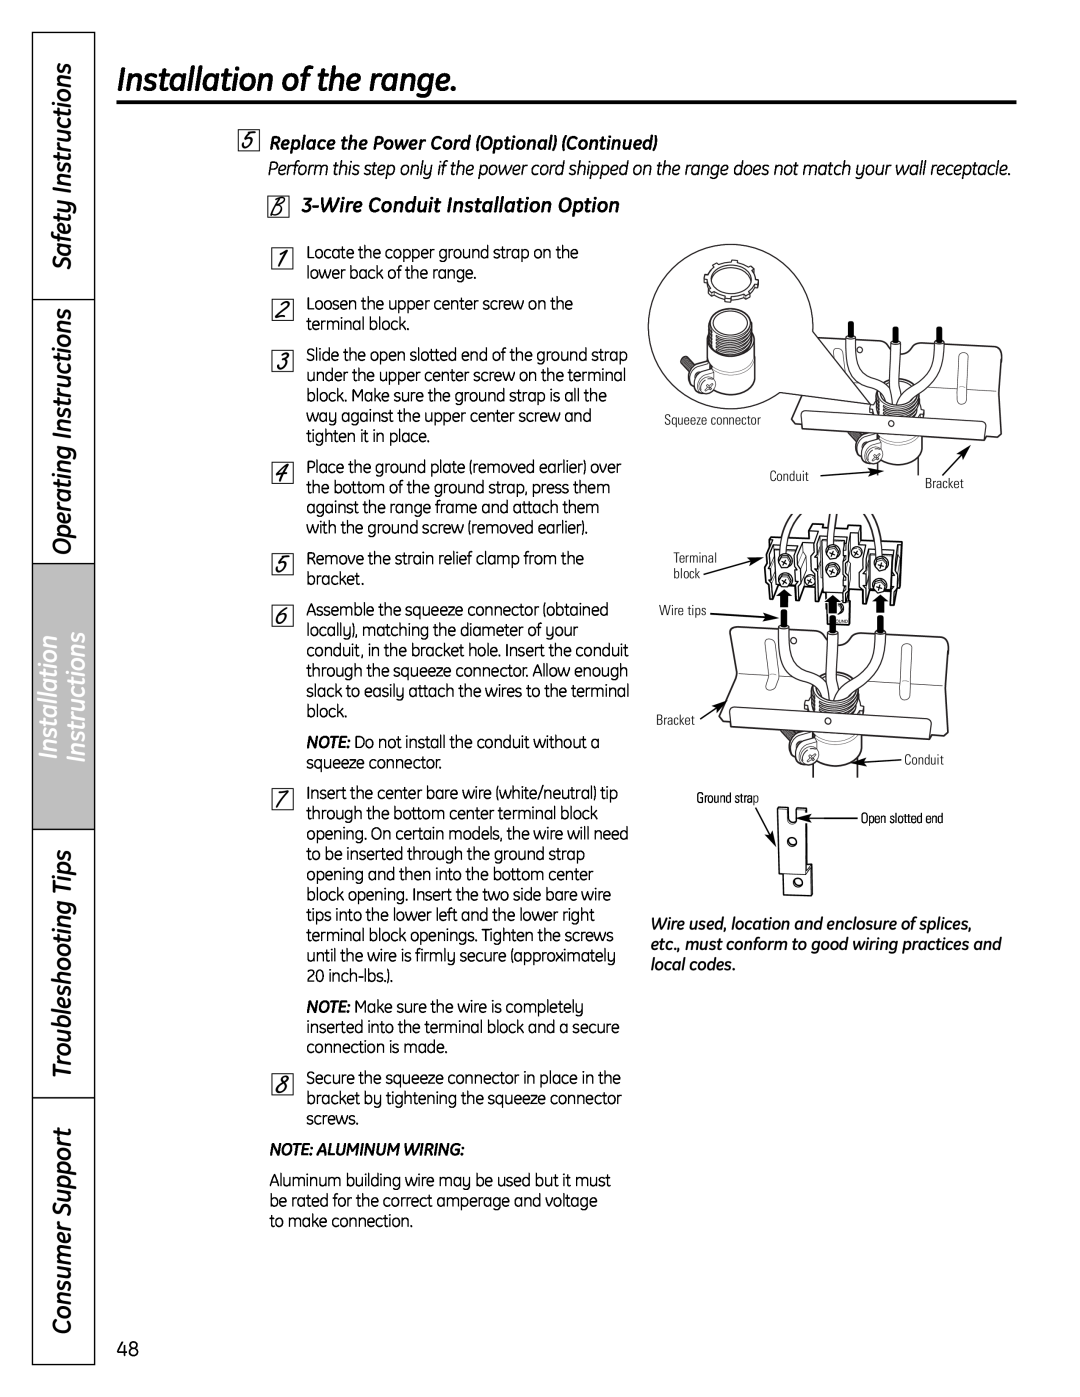 GE C2S980, 04-09 JR WireConduit Installation Option, Installationof the range, Safety Instructions, Operating Instructions 